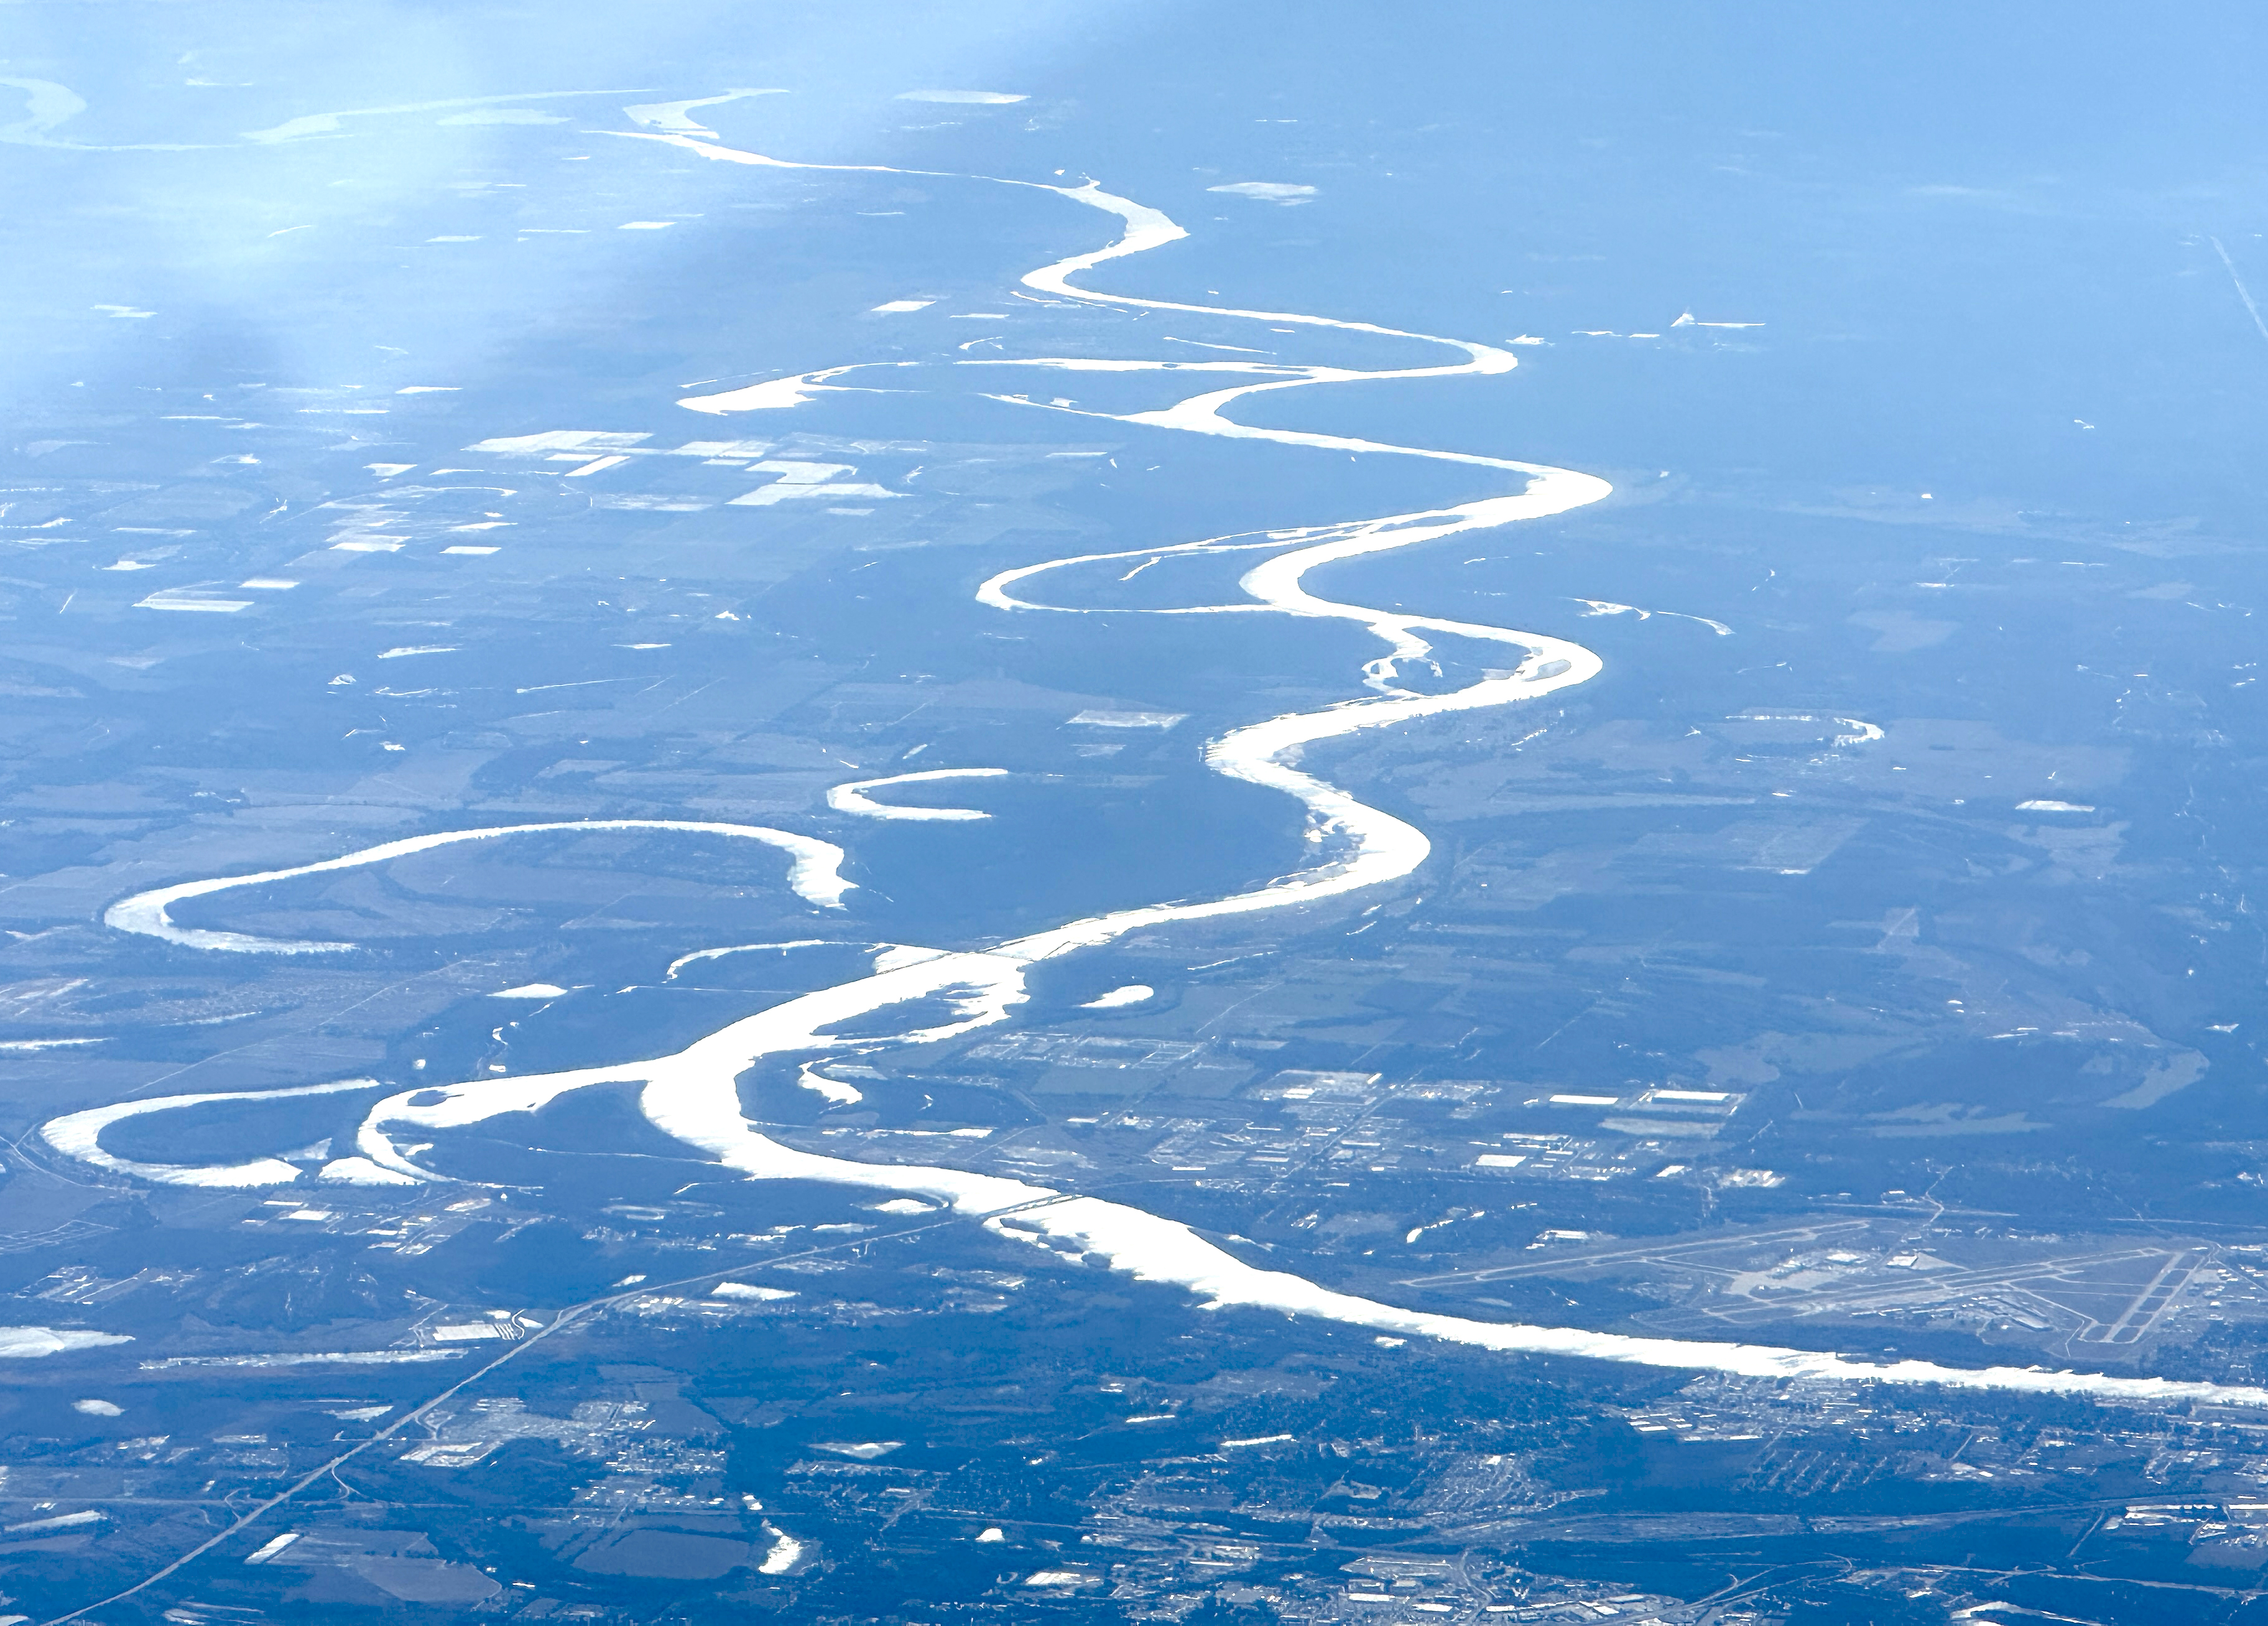 meander with oxbows